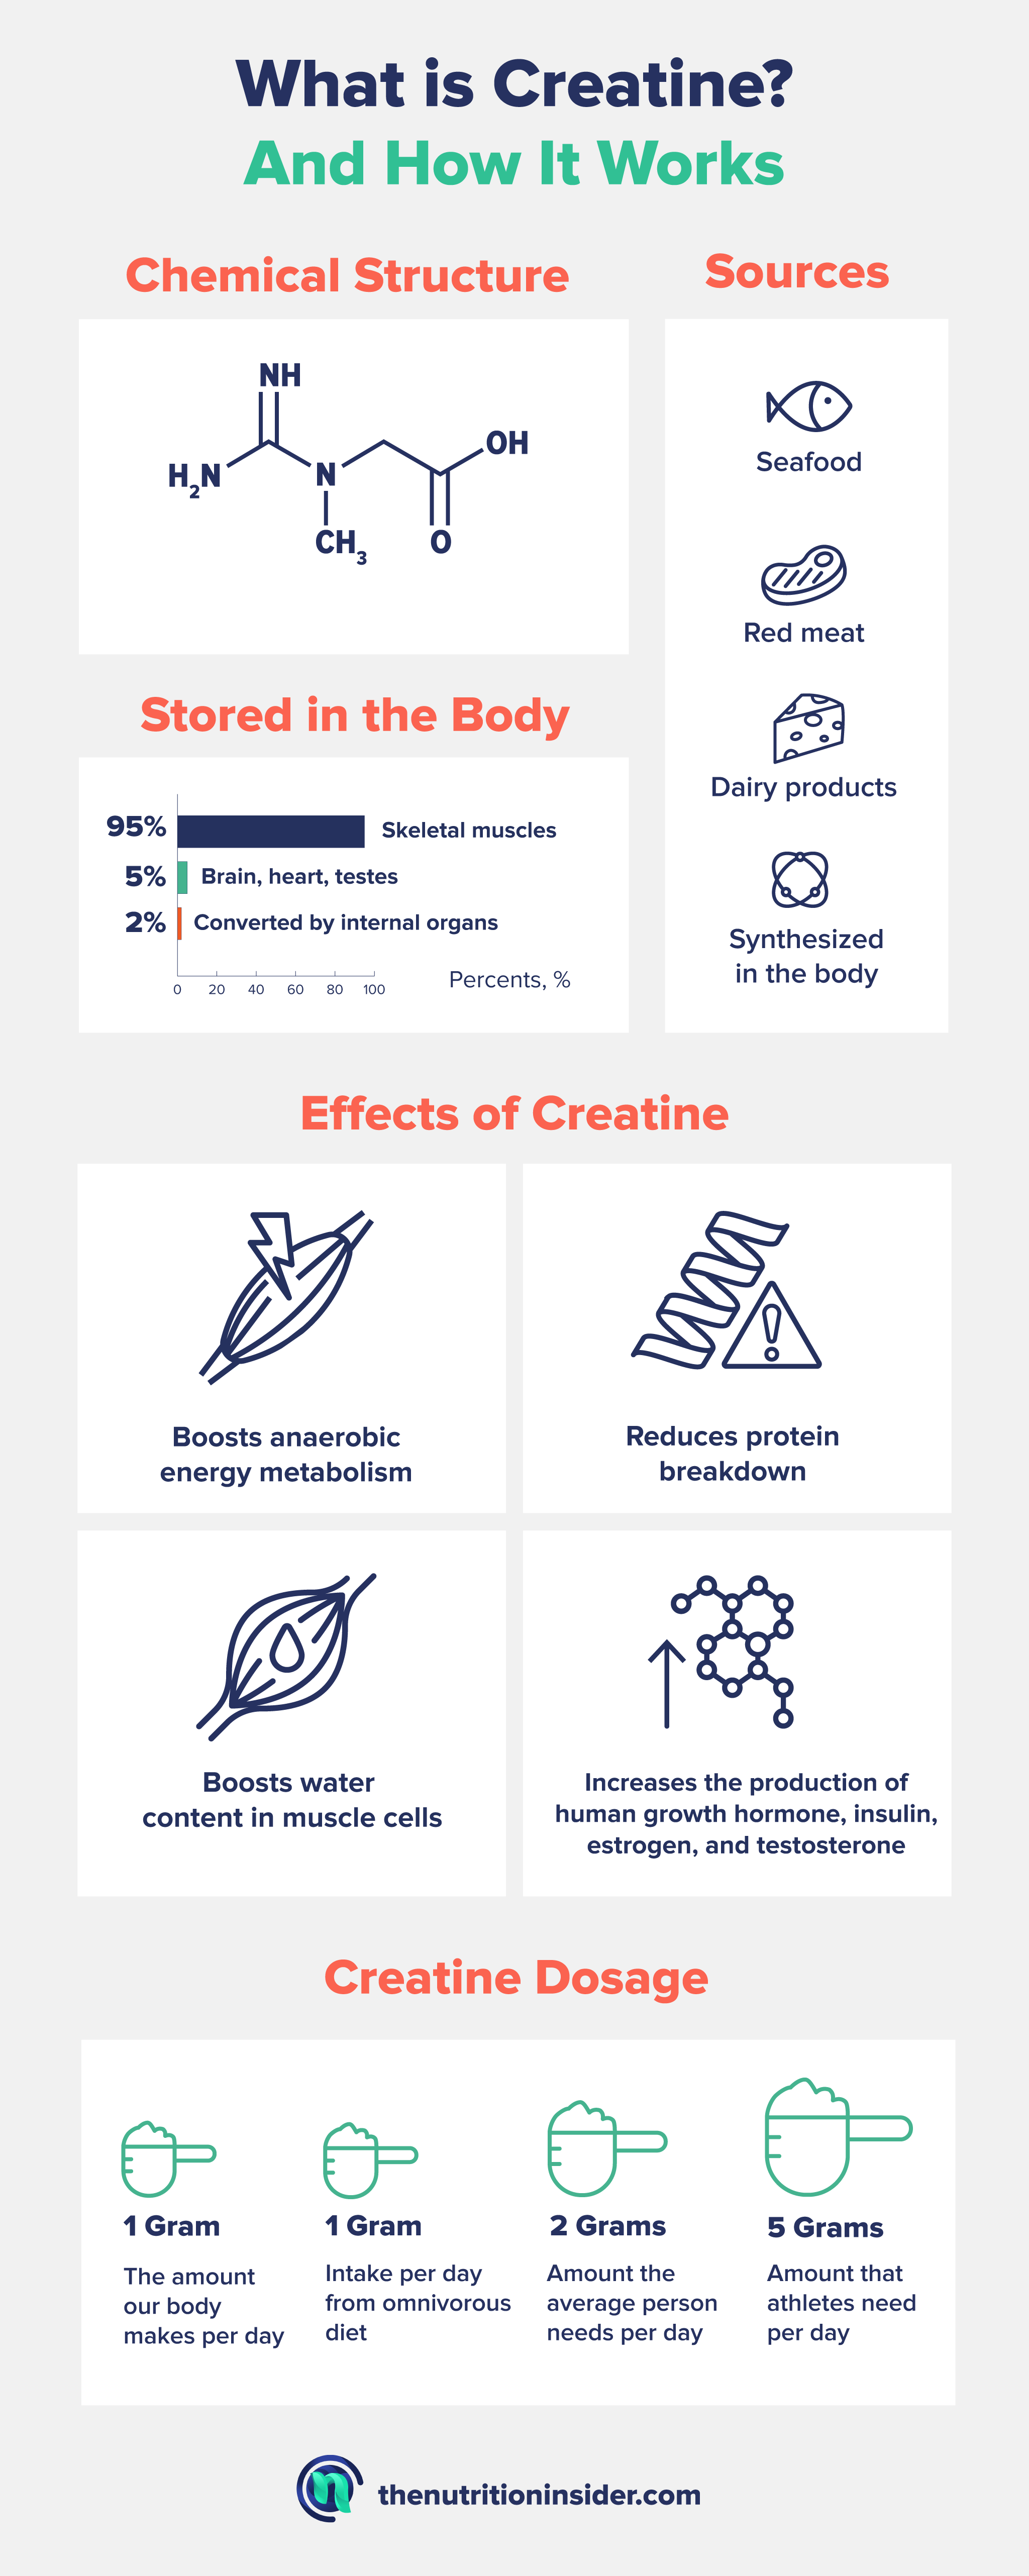 What is Creatine? And How it works